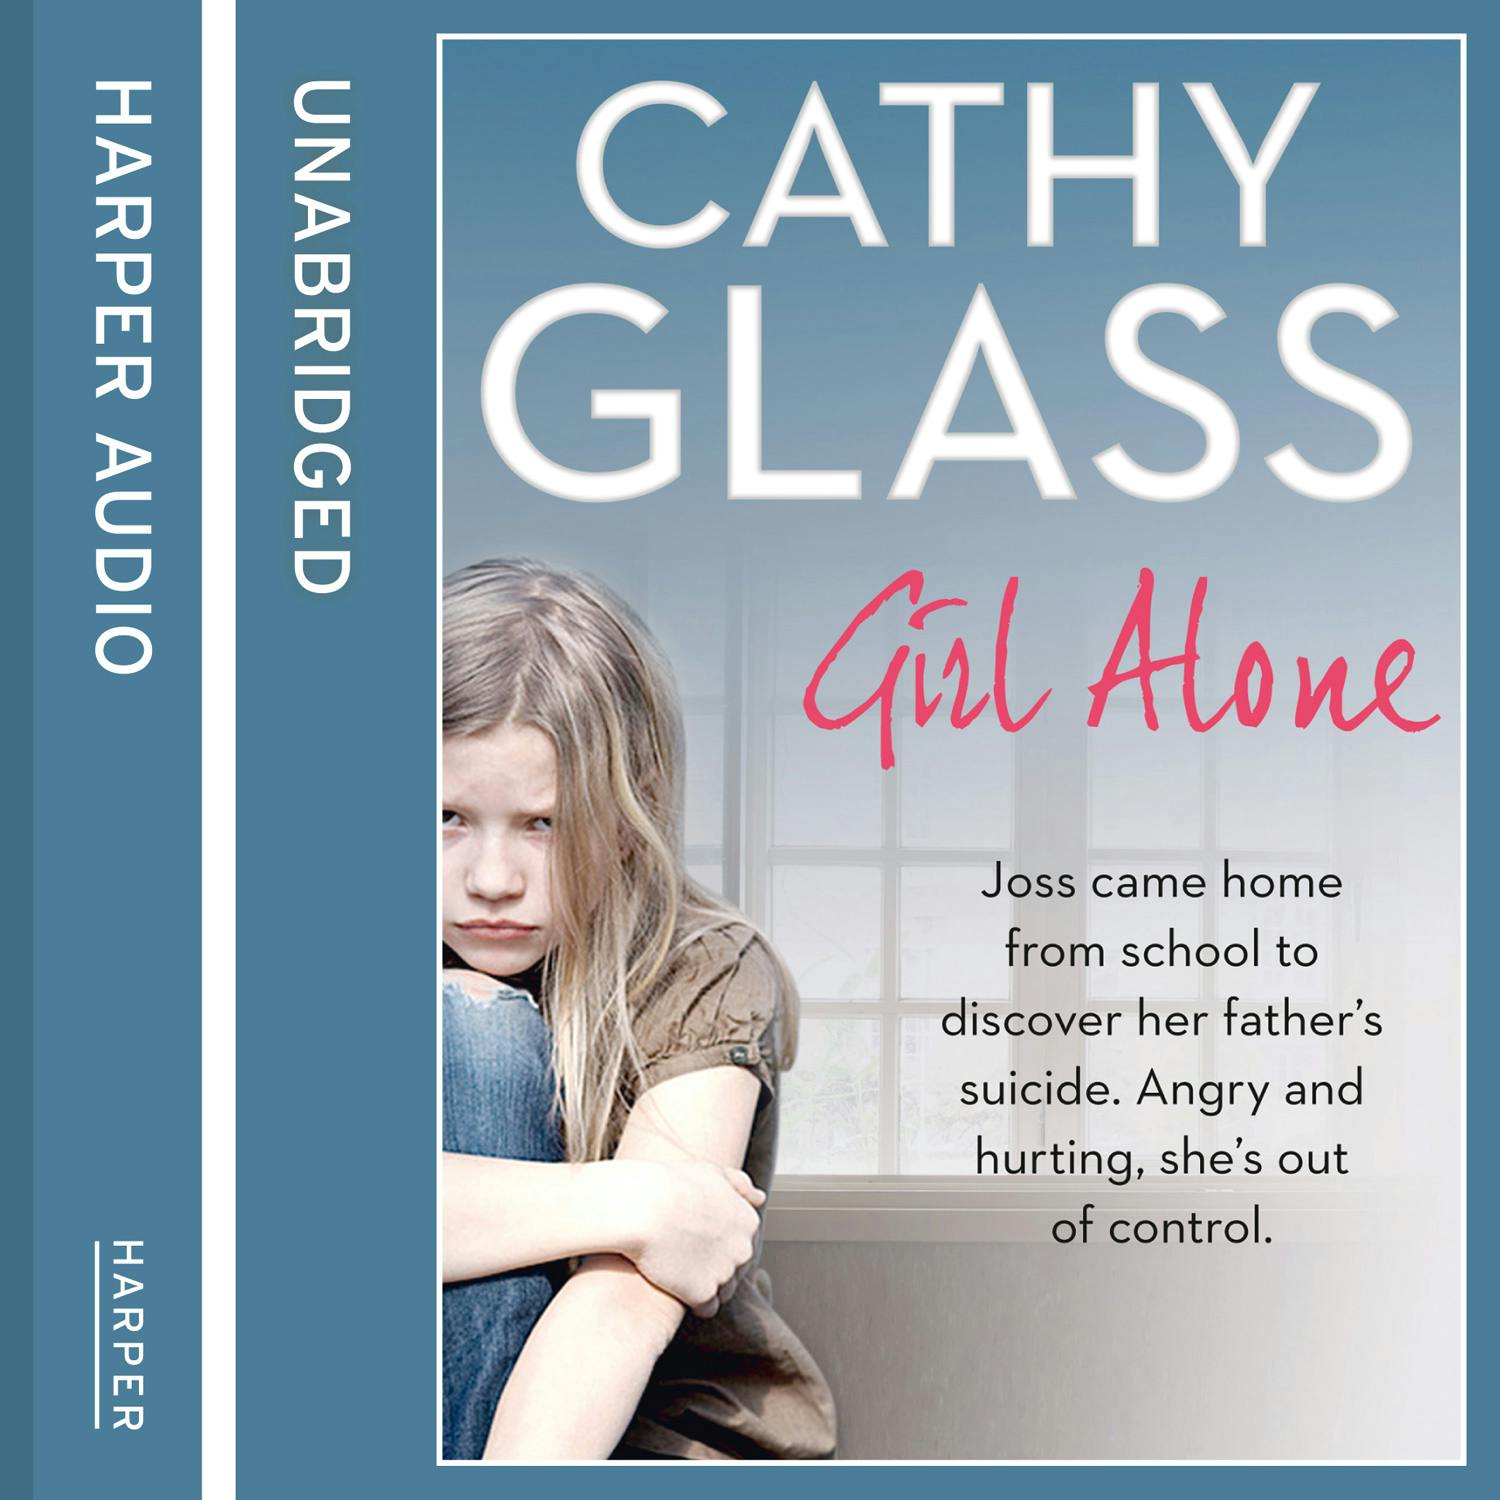 Girl Alone: Joss came home from school to discover her father’s suicide. Angry and hurting, she’s out of control. - Cathy Glass